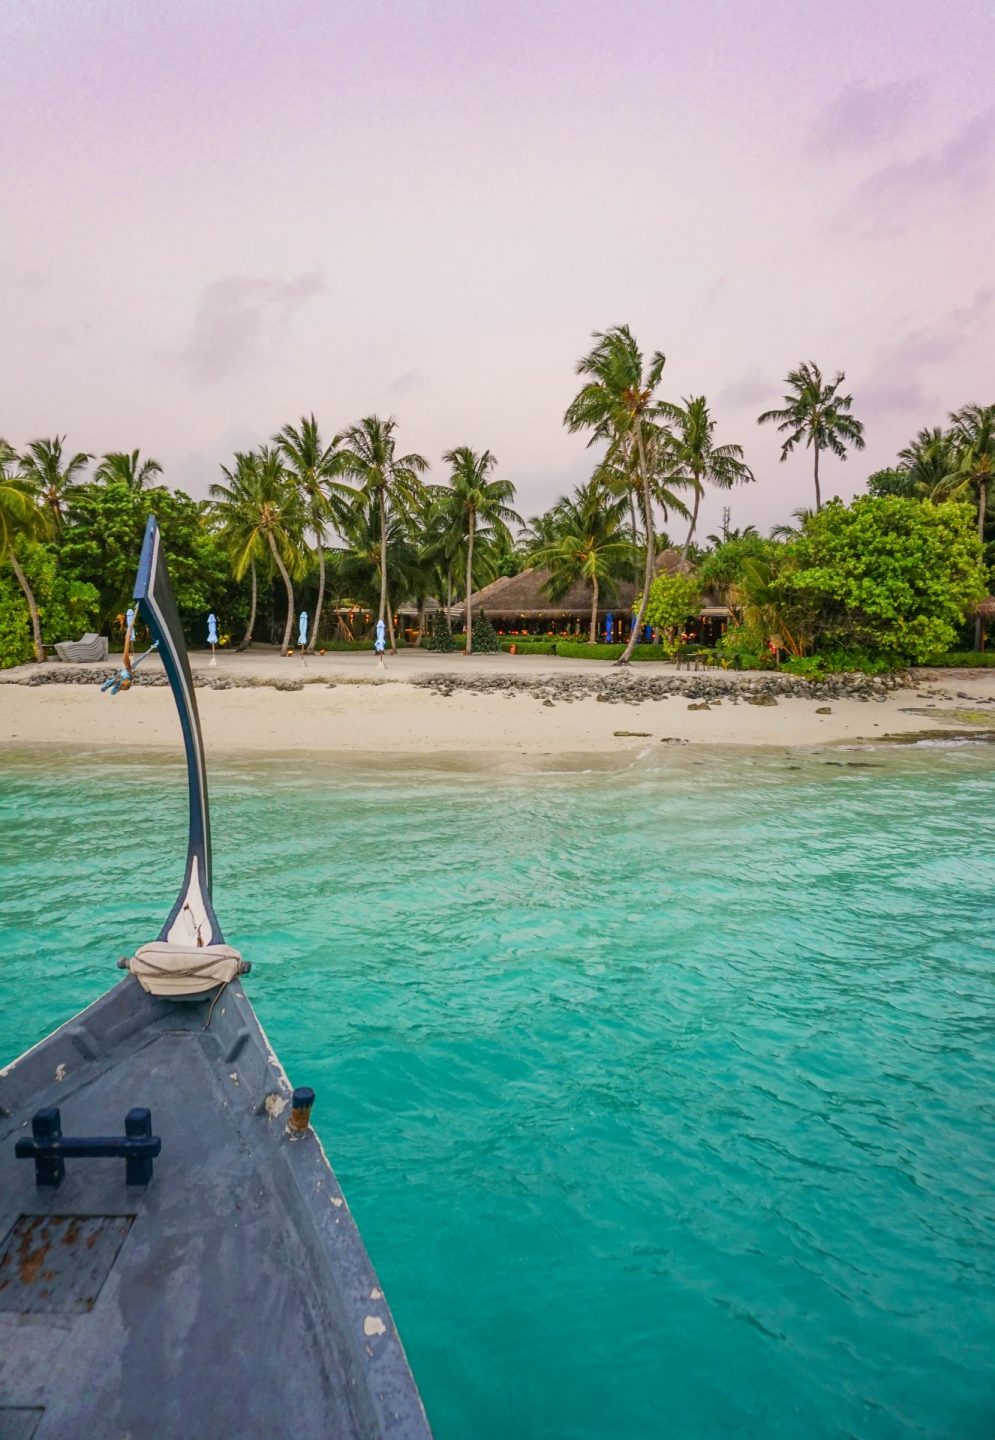 How to plan the perfect Maldives Honeymoon Best hotels, transfers, island and atoll to stay.